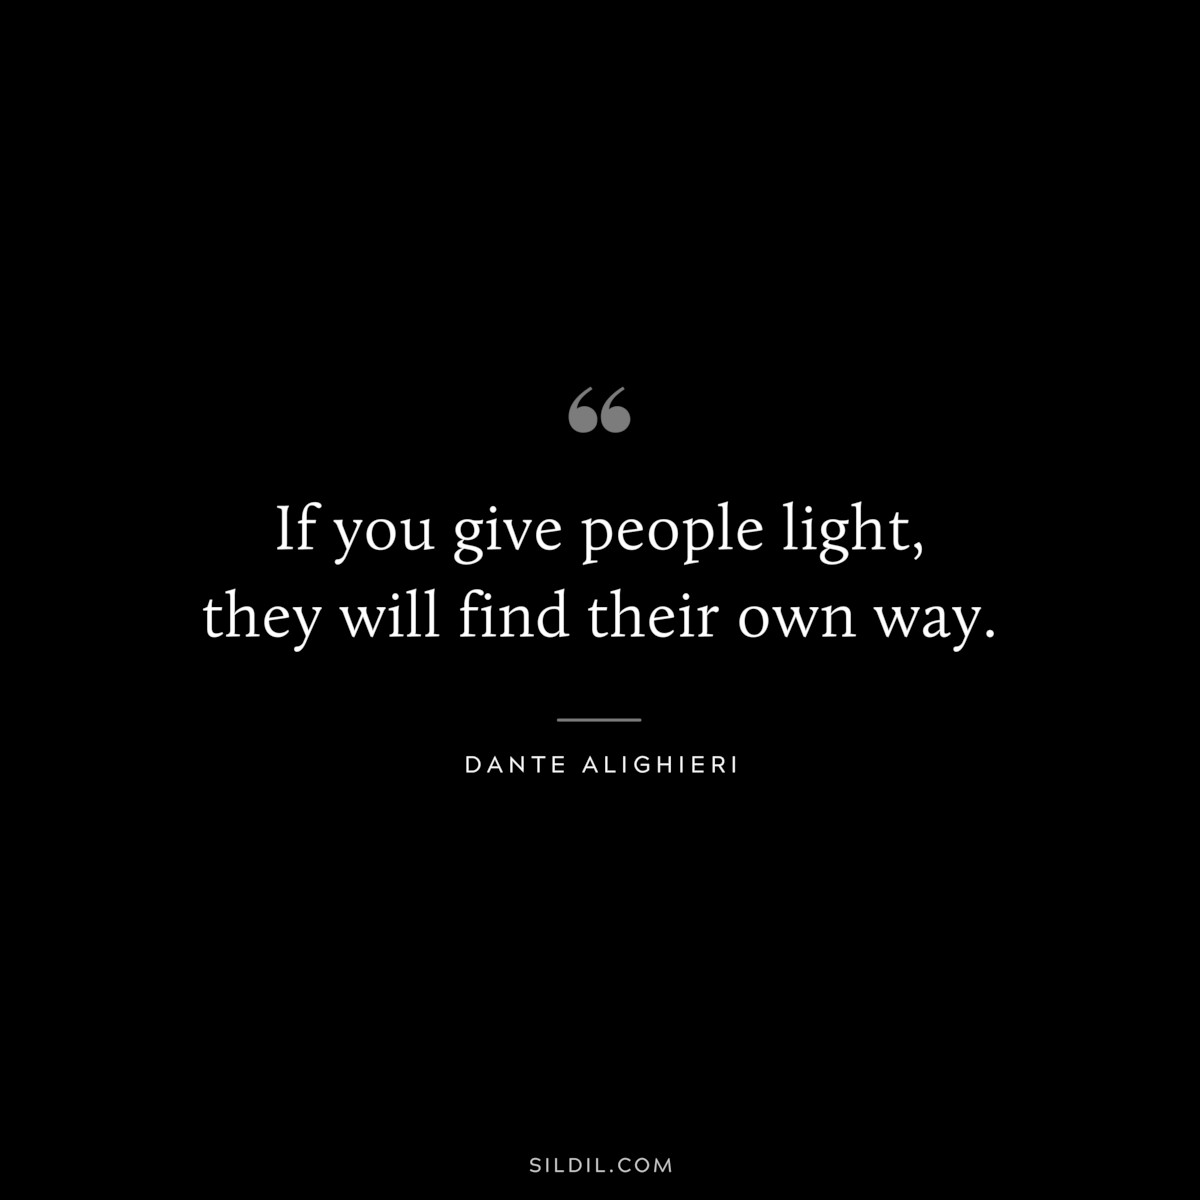 If you give people light, they will find their own way. ― Dante Alighieri